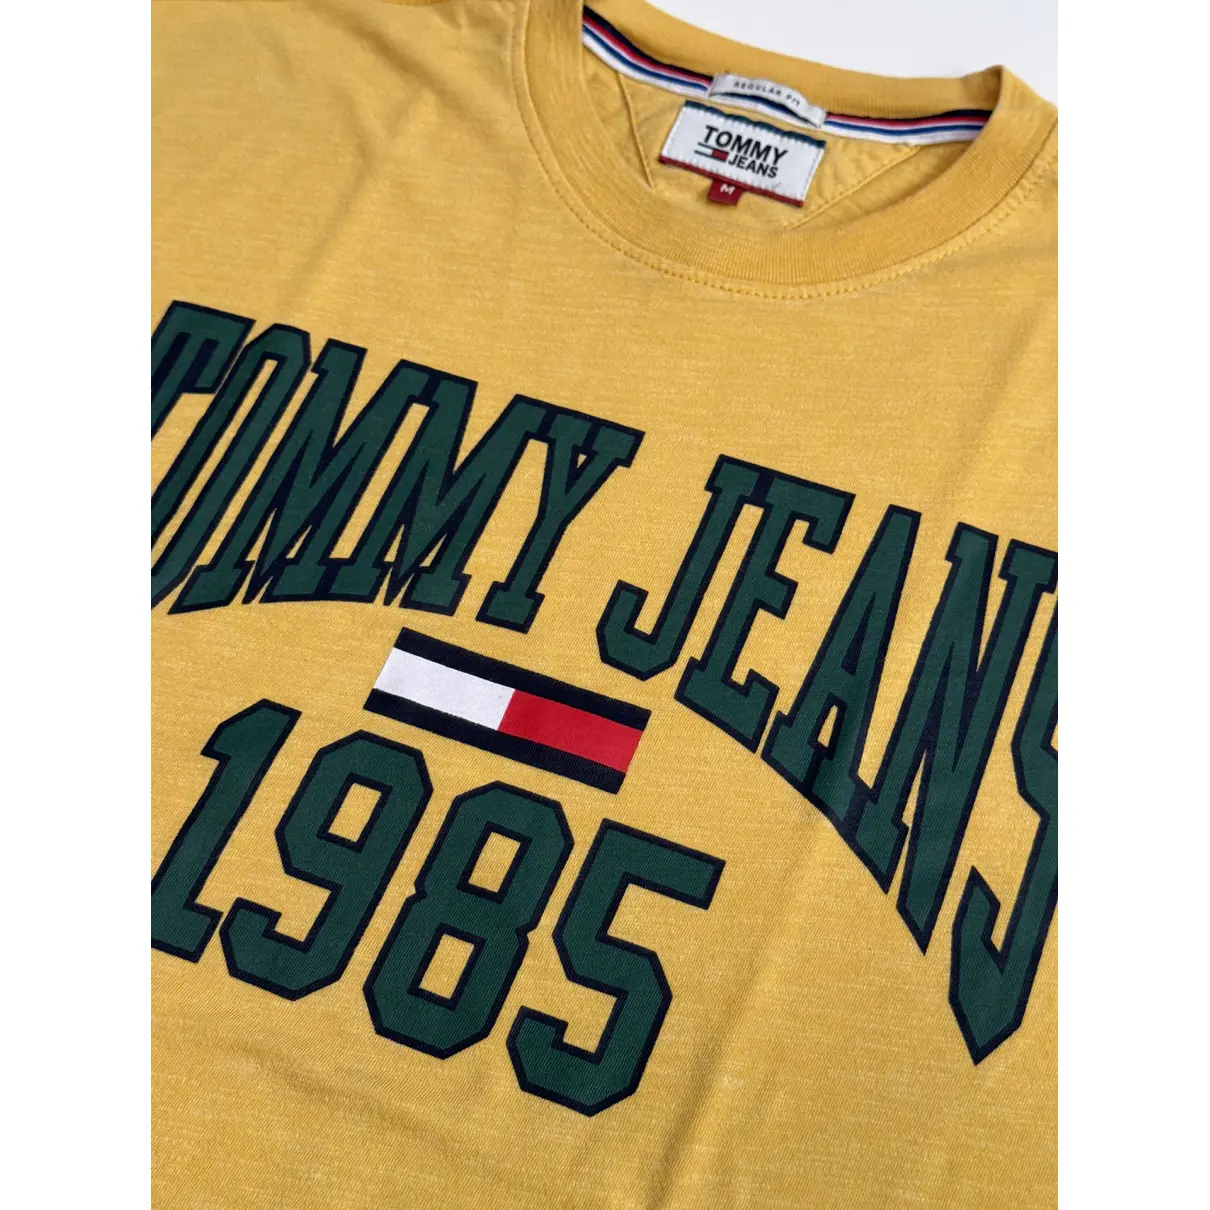 Buy Tommy Jeans T-shirt online